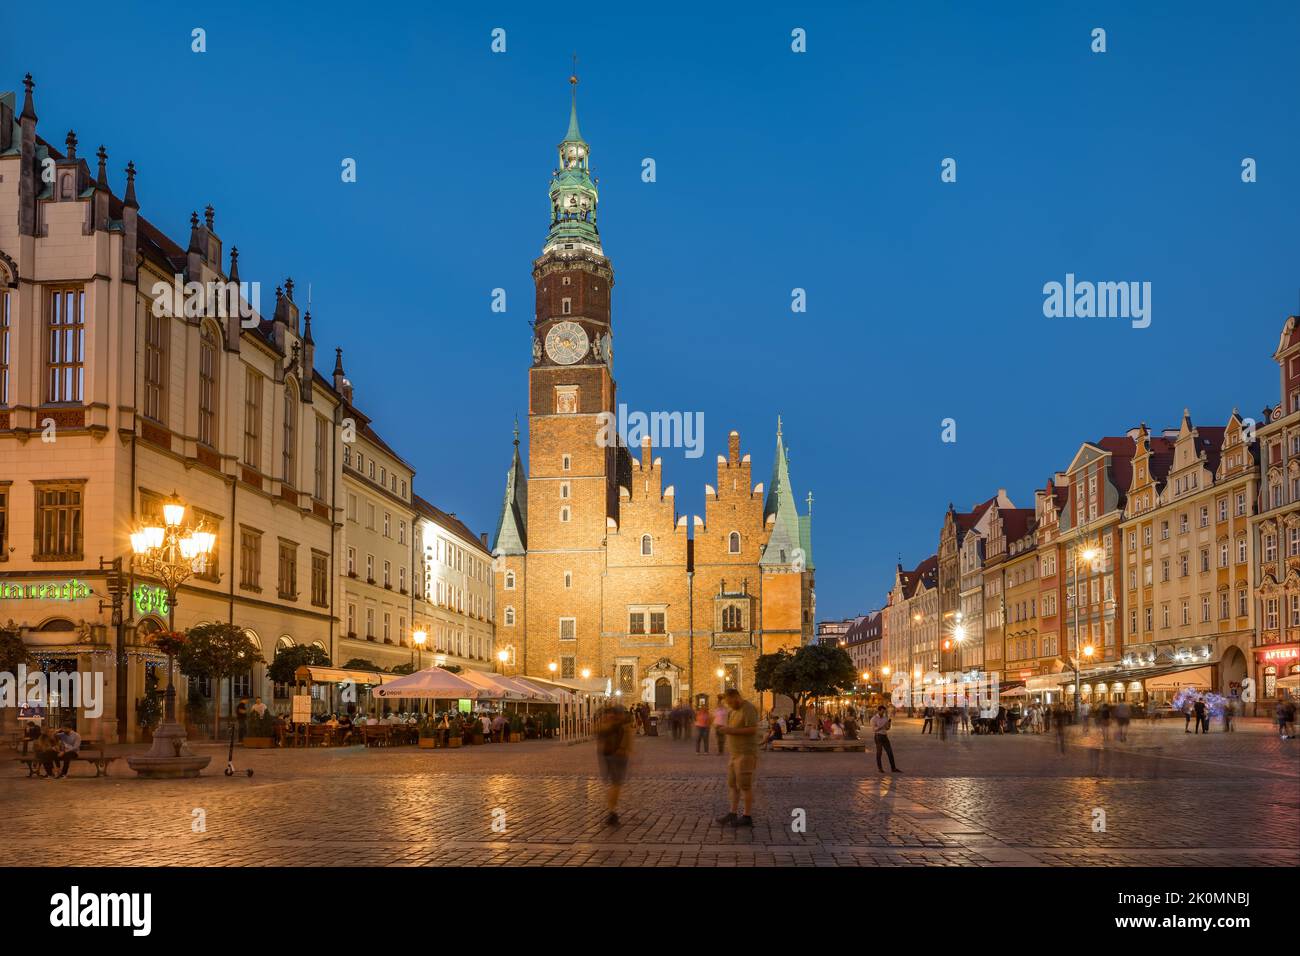 Wroclaw market square at night in Poland Stock Photo